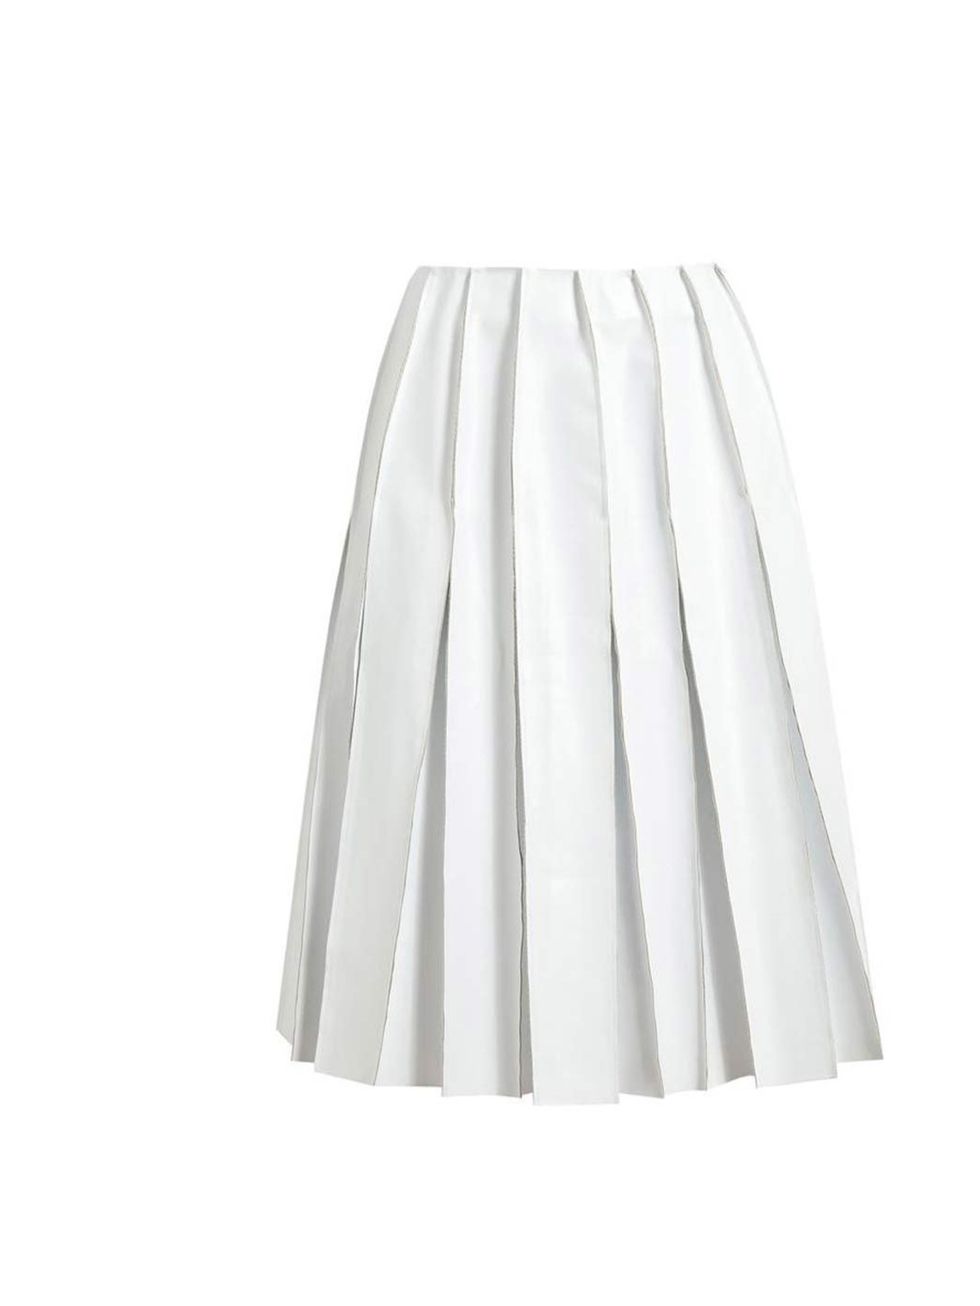 <p>J.W.Anderson skirt, £520 at <a href="http://www.brownsfashion.com/product/03J120730004/134/reverse-seam-leather-effect-skirt">Browns</a></p>